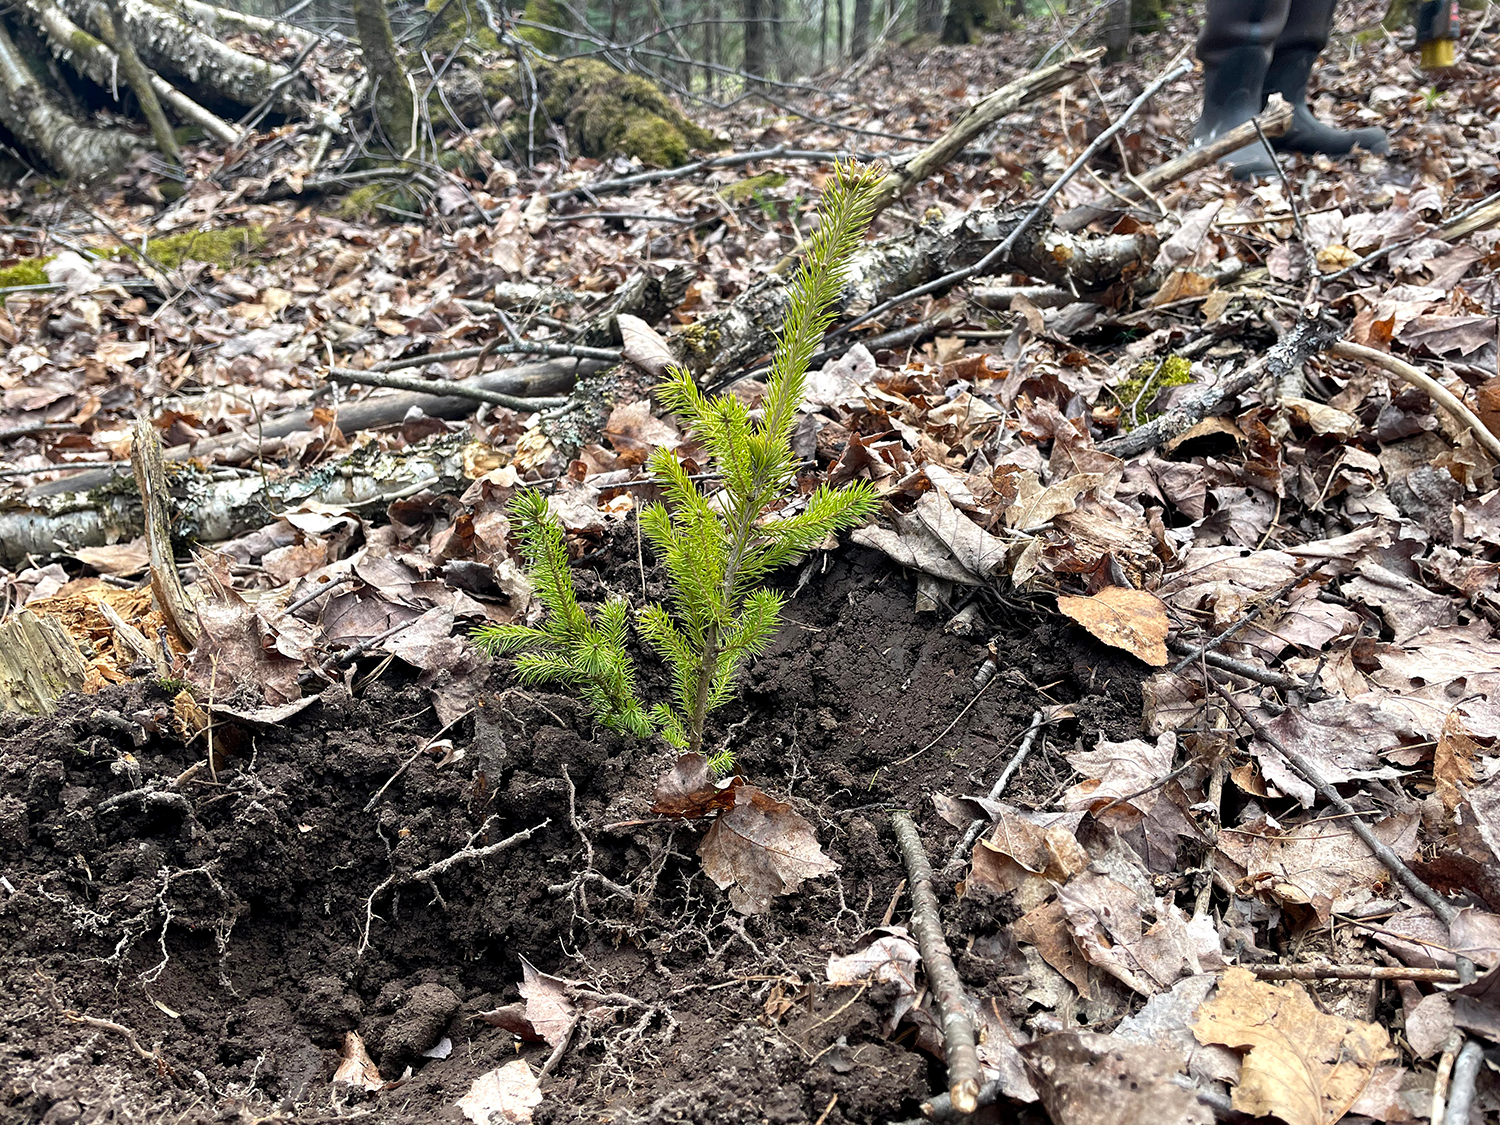 A new tree begins to grow in Ottawa National Forest.